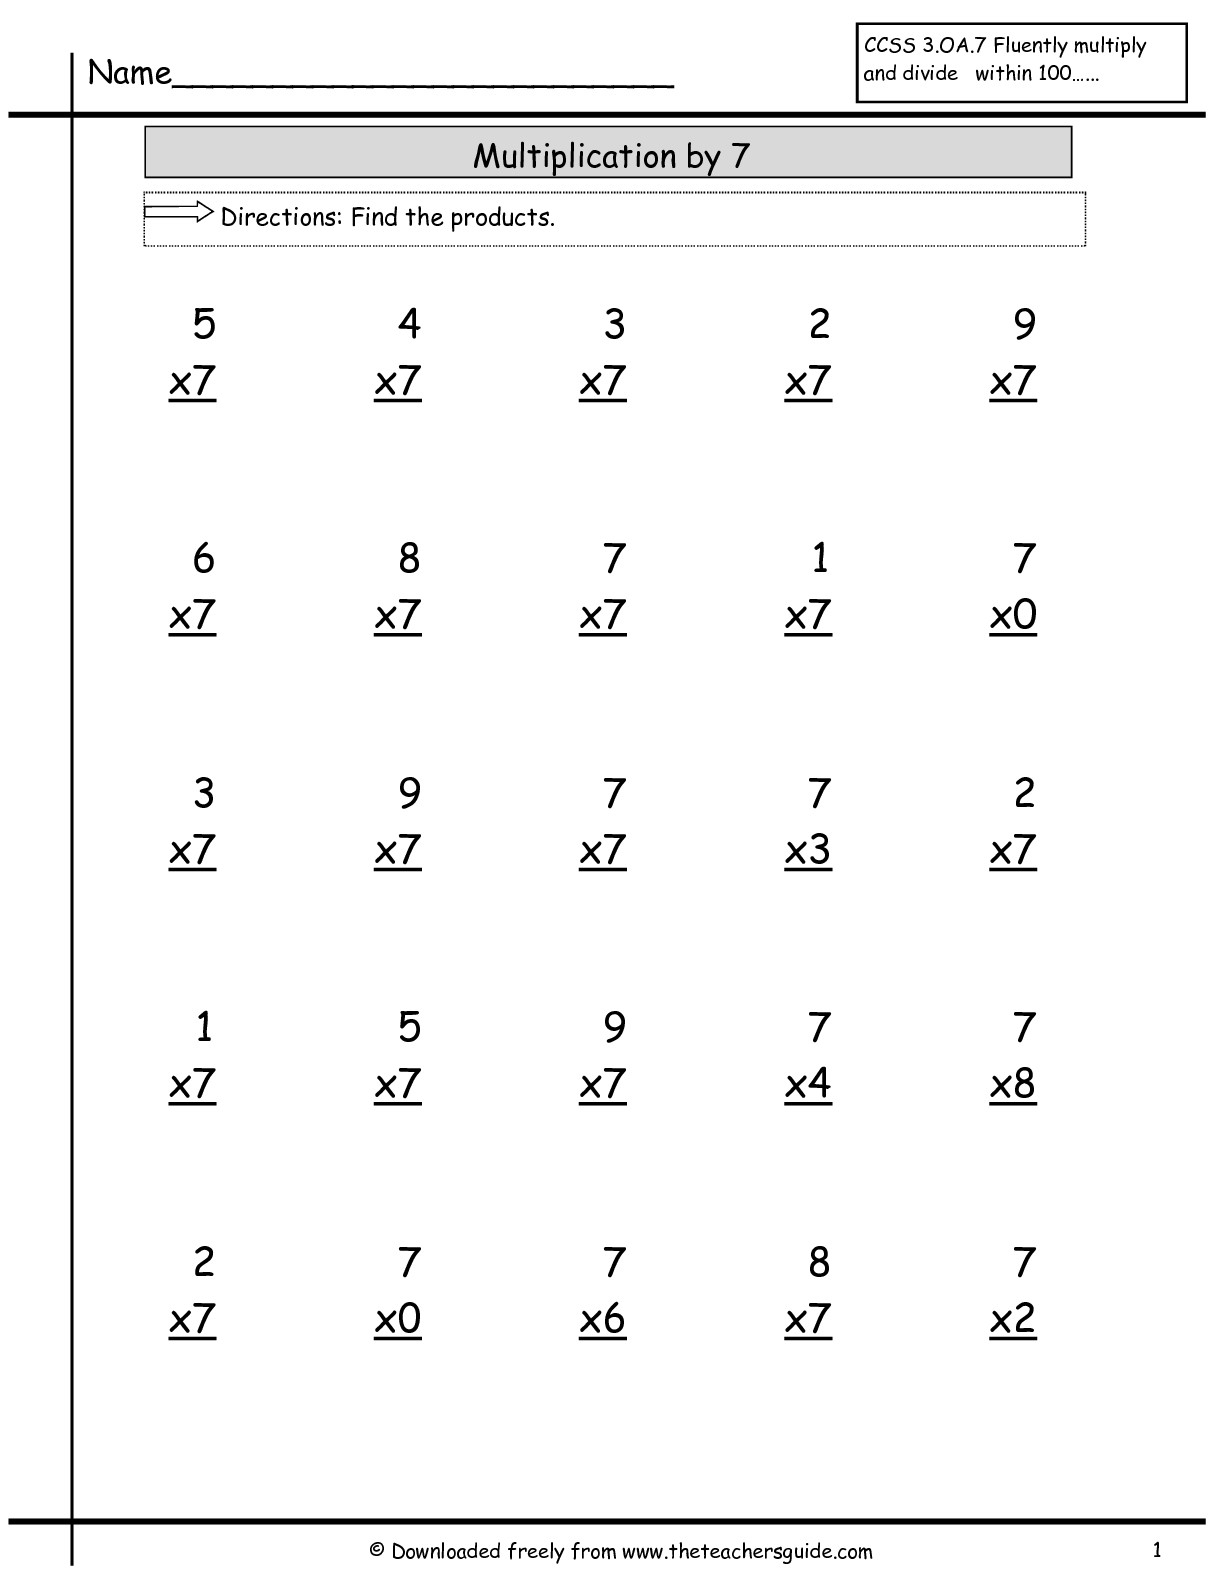 Multiplication Facts Worksheets From The Teacher&amp;#039;s Guide regarding Multiplication Worksheets Year 7